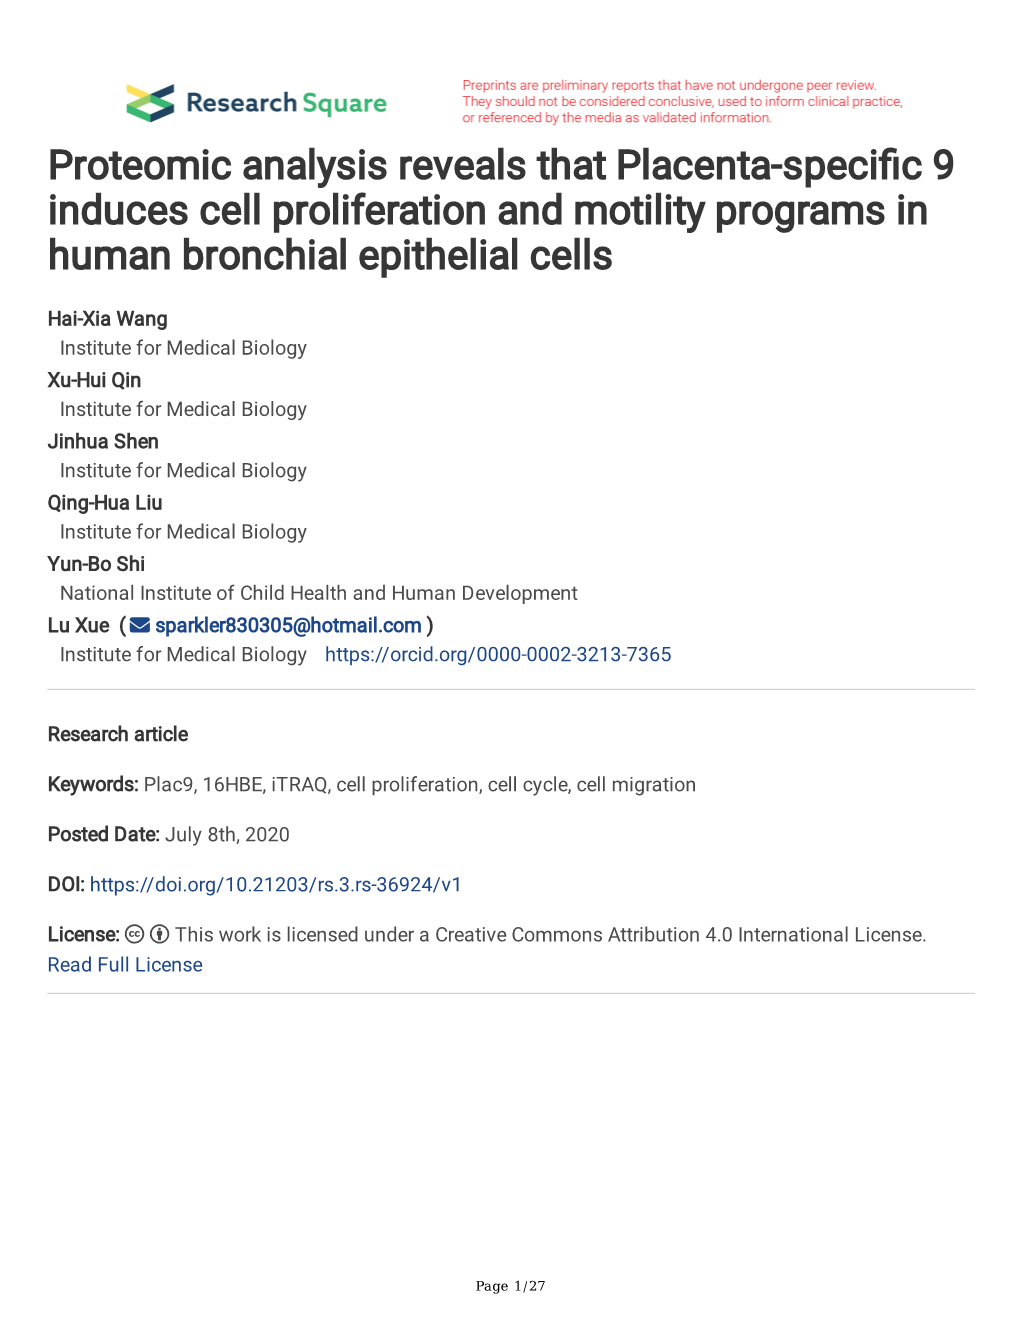 Proteomic Analysis Reveals That Placenta-Speci C 9 Induces Cell